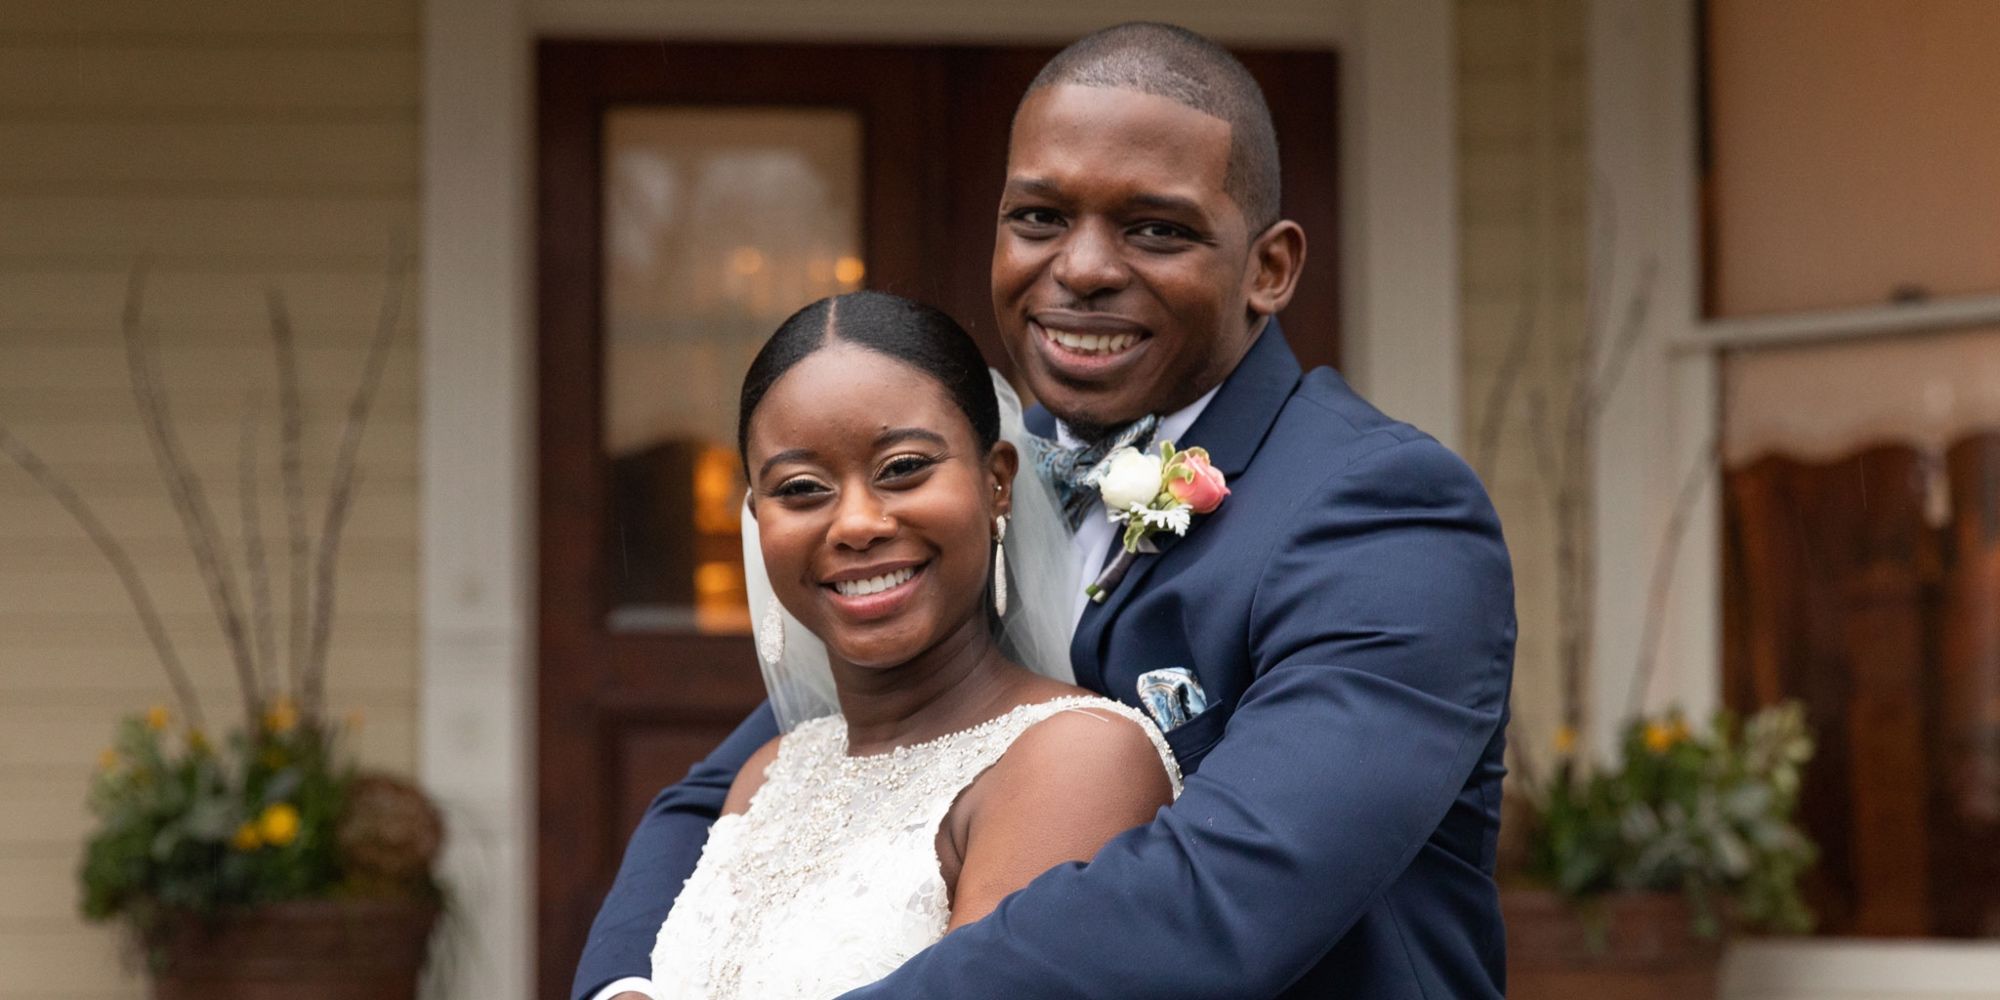 Married At First Sight: What Happened To Deonna & Greg After Season 9.